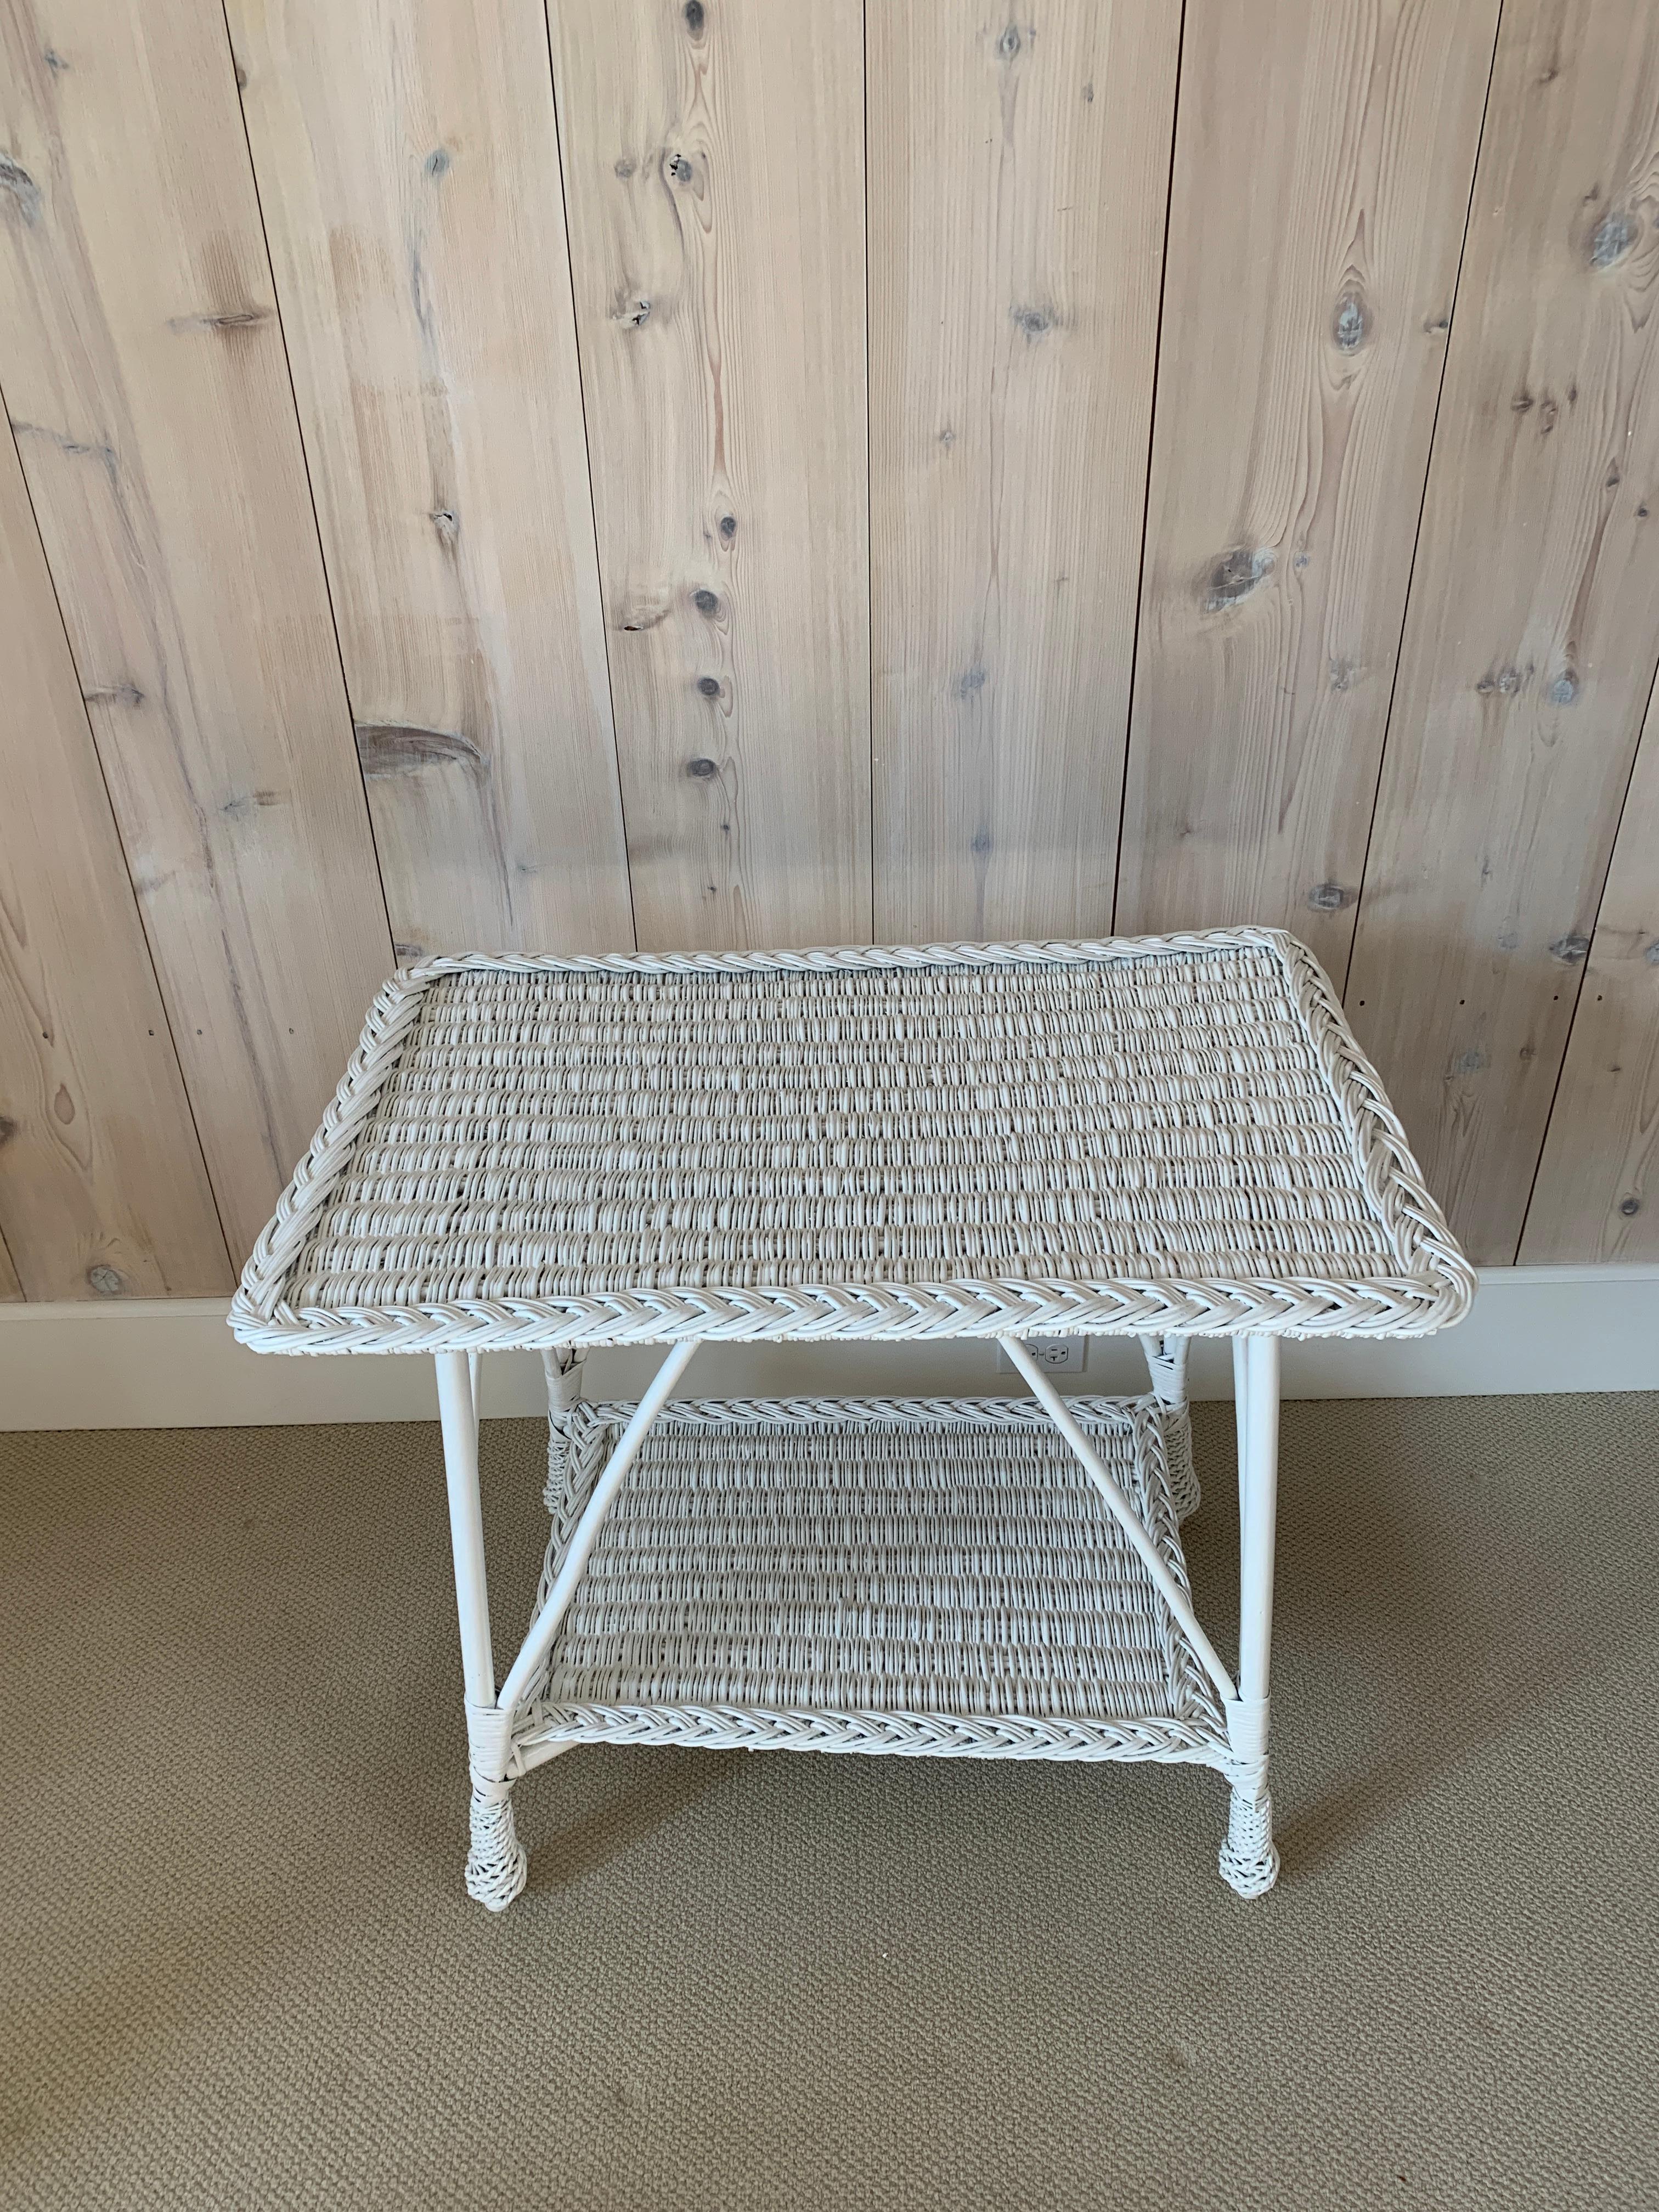 Willow Antique Wicker Table For Sale